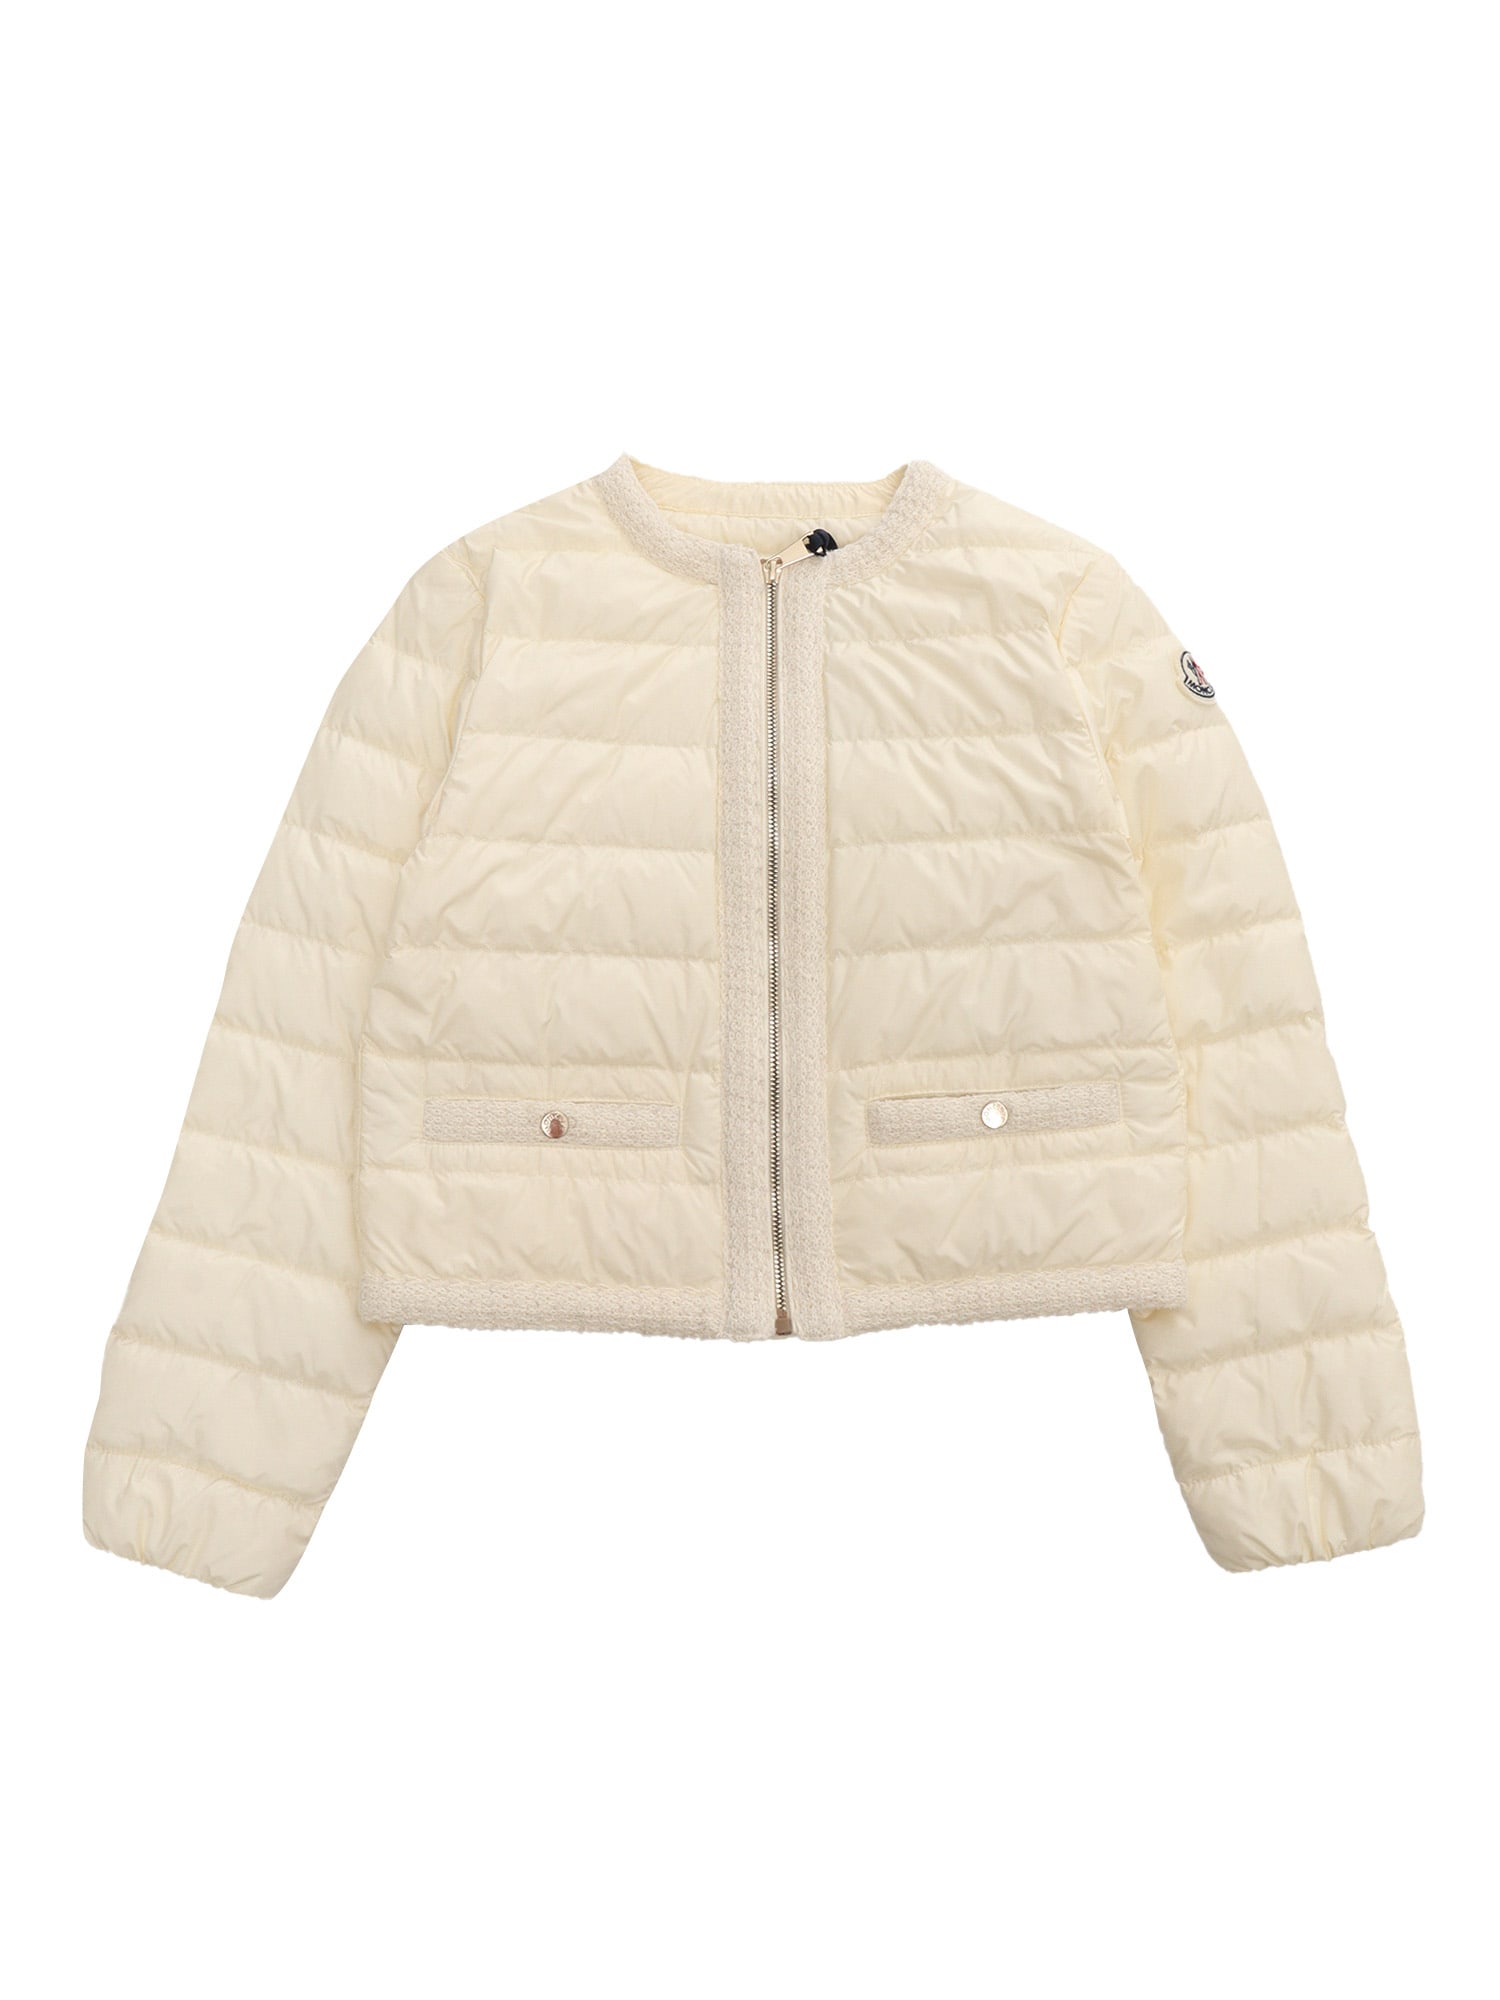 Moncler Kids' Cream-colored Dafina Jacket In Panna